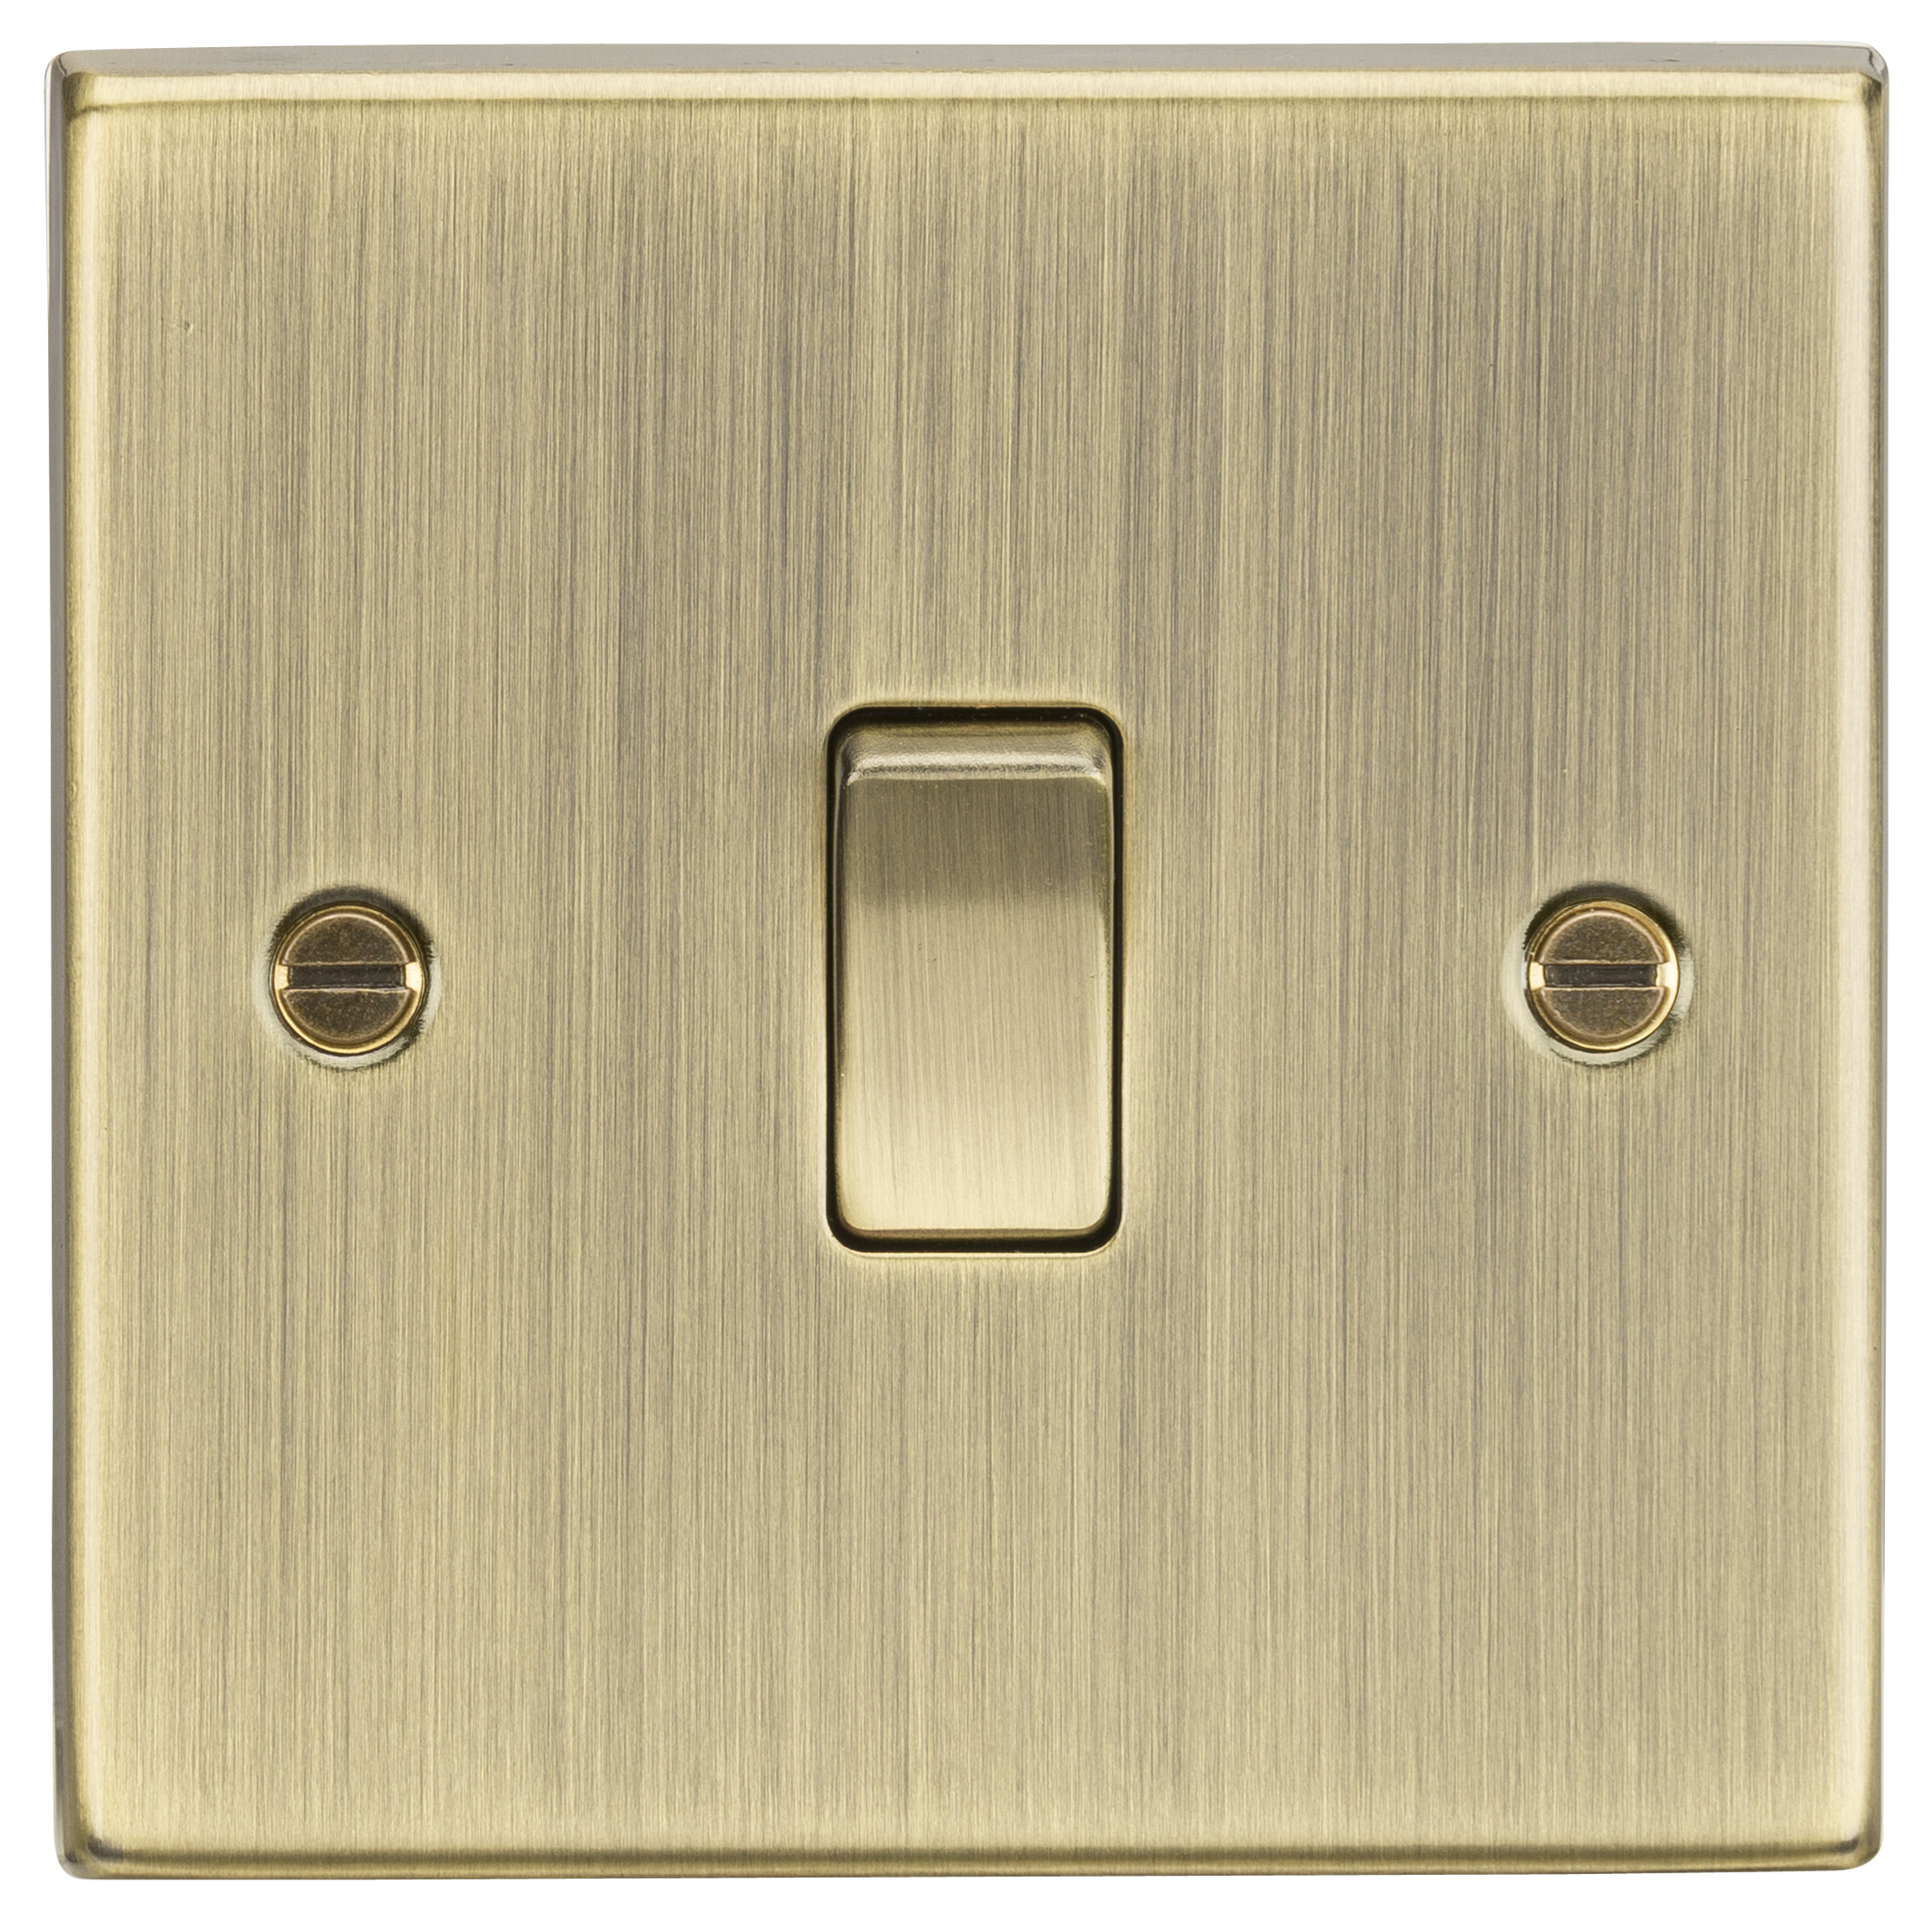 10A 1G 2-Way Plate Switch - Square Edge Antique Brass - CS2AB 